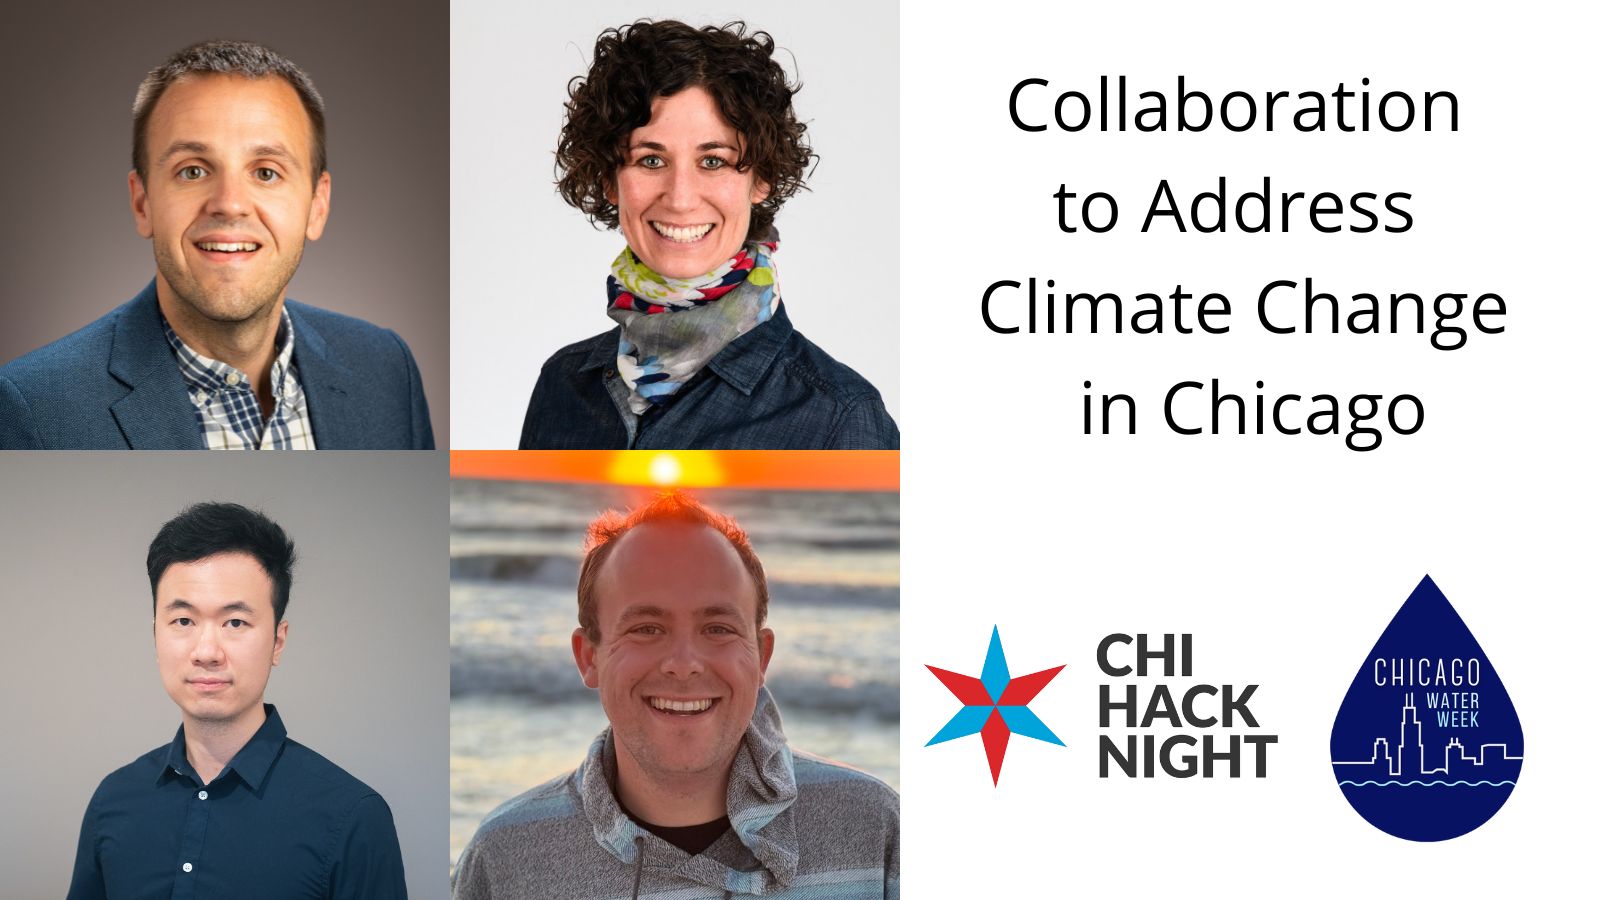 Online: Collaboration to Address Climate Change in Chicago